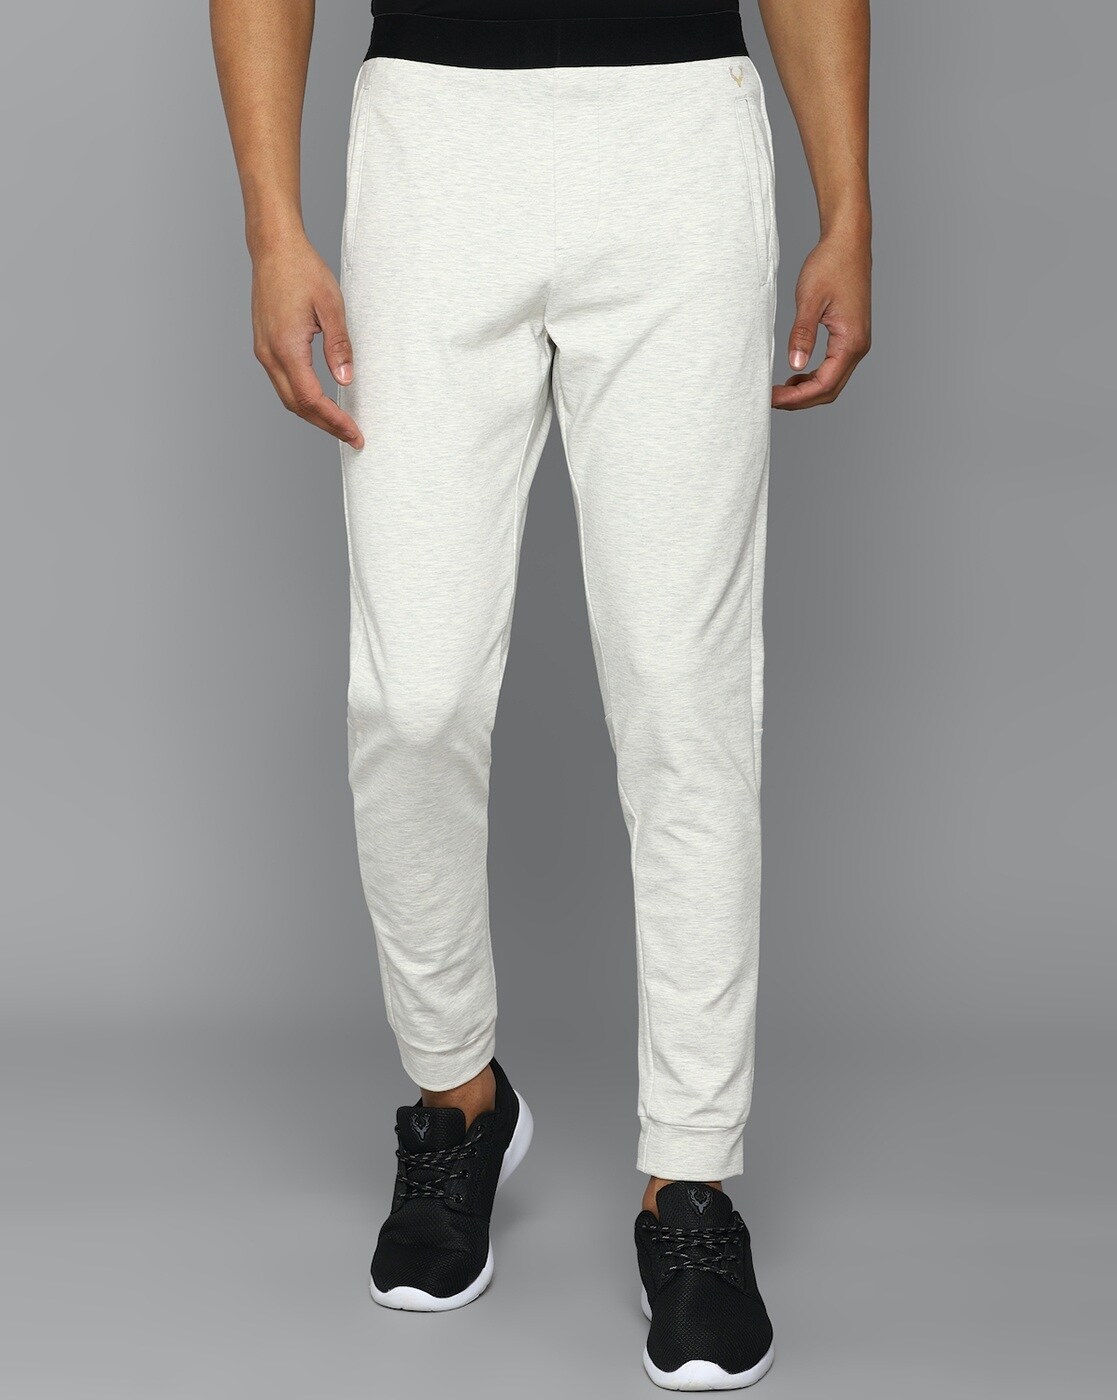 Allen Solly Grey Jogger Pants : Amazon.in: Clothing & Accessories